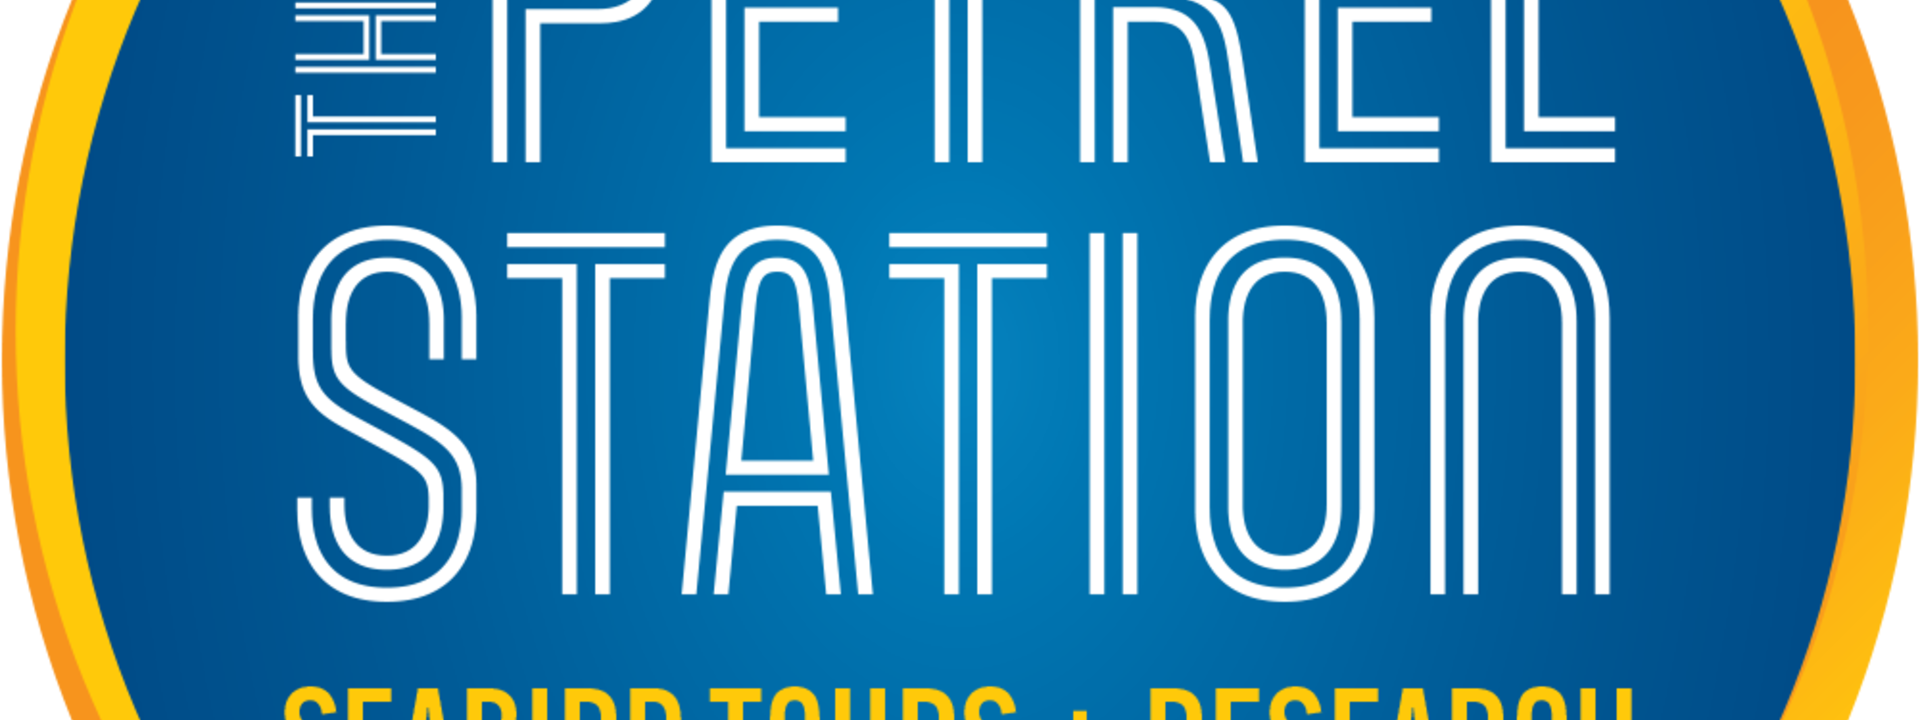 TPST_Logo_1000px_Tours.png